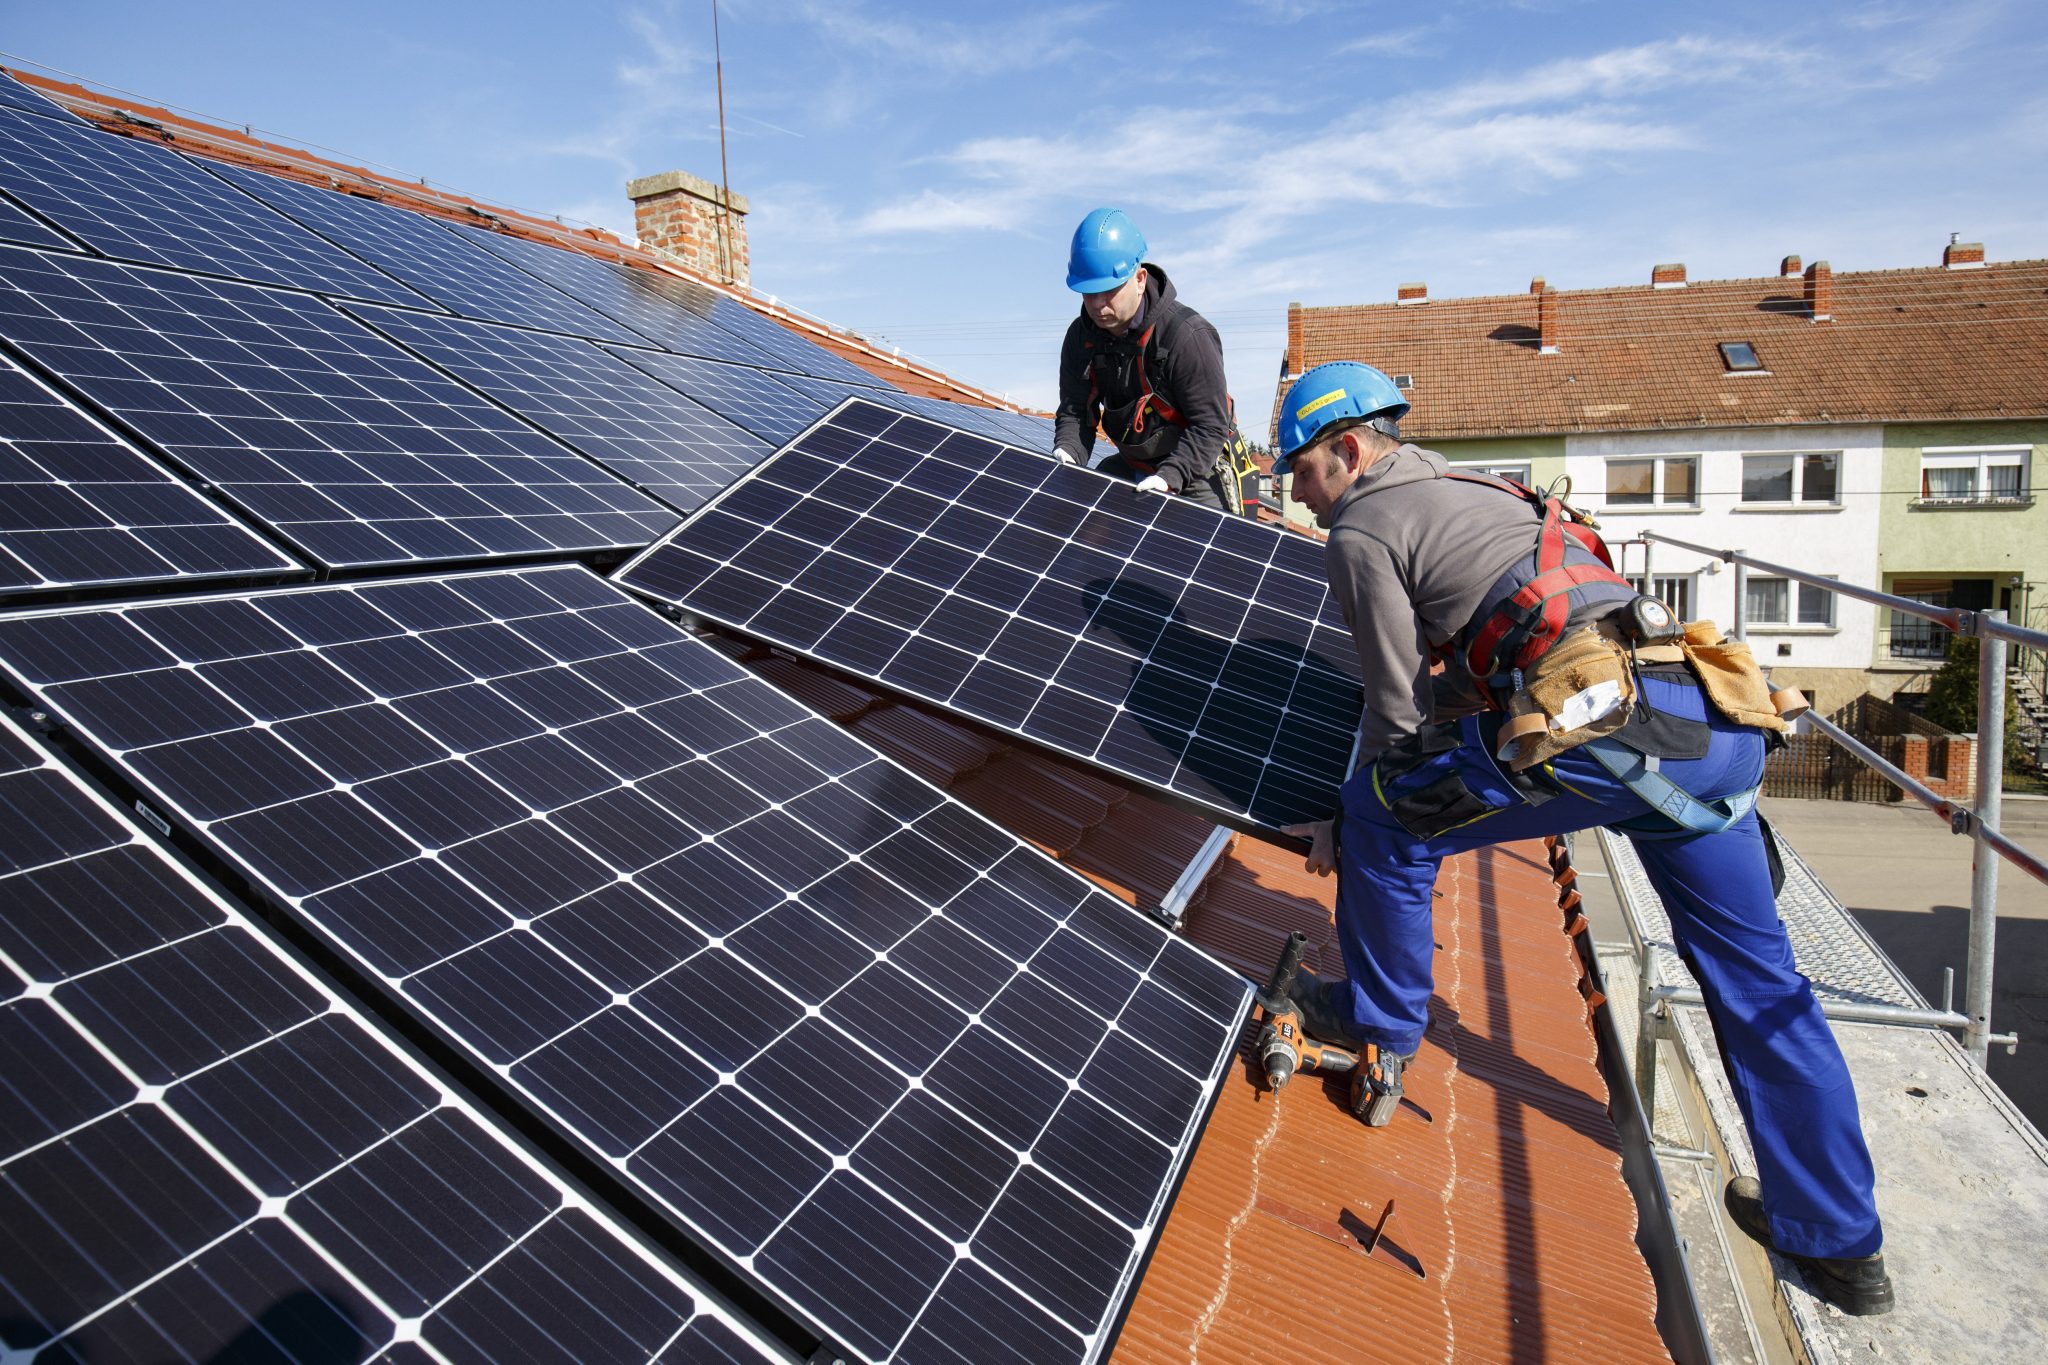 Hungarians Keen on Installing Solar Panels, Survey Found